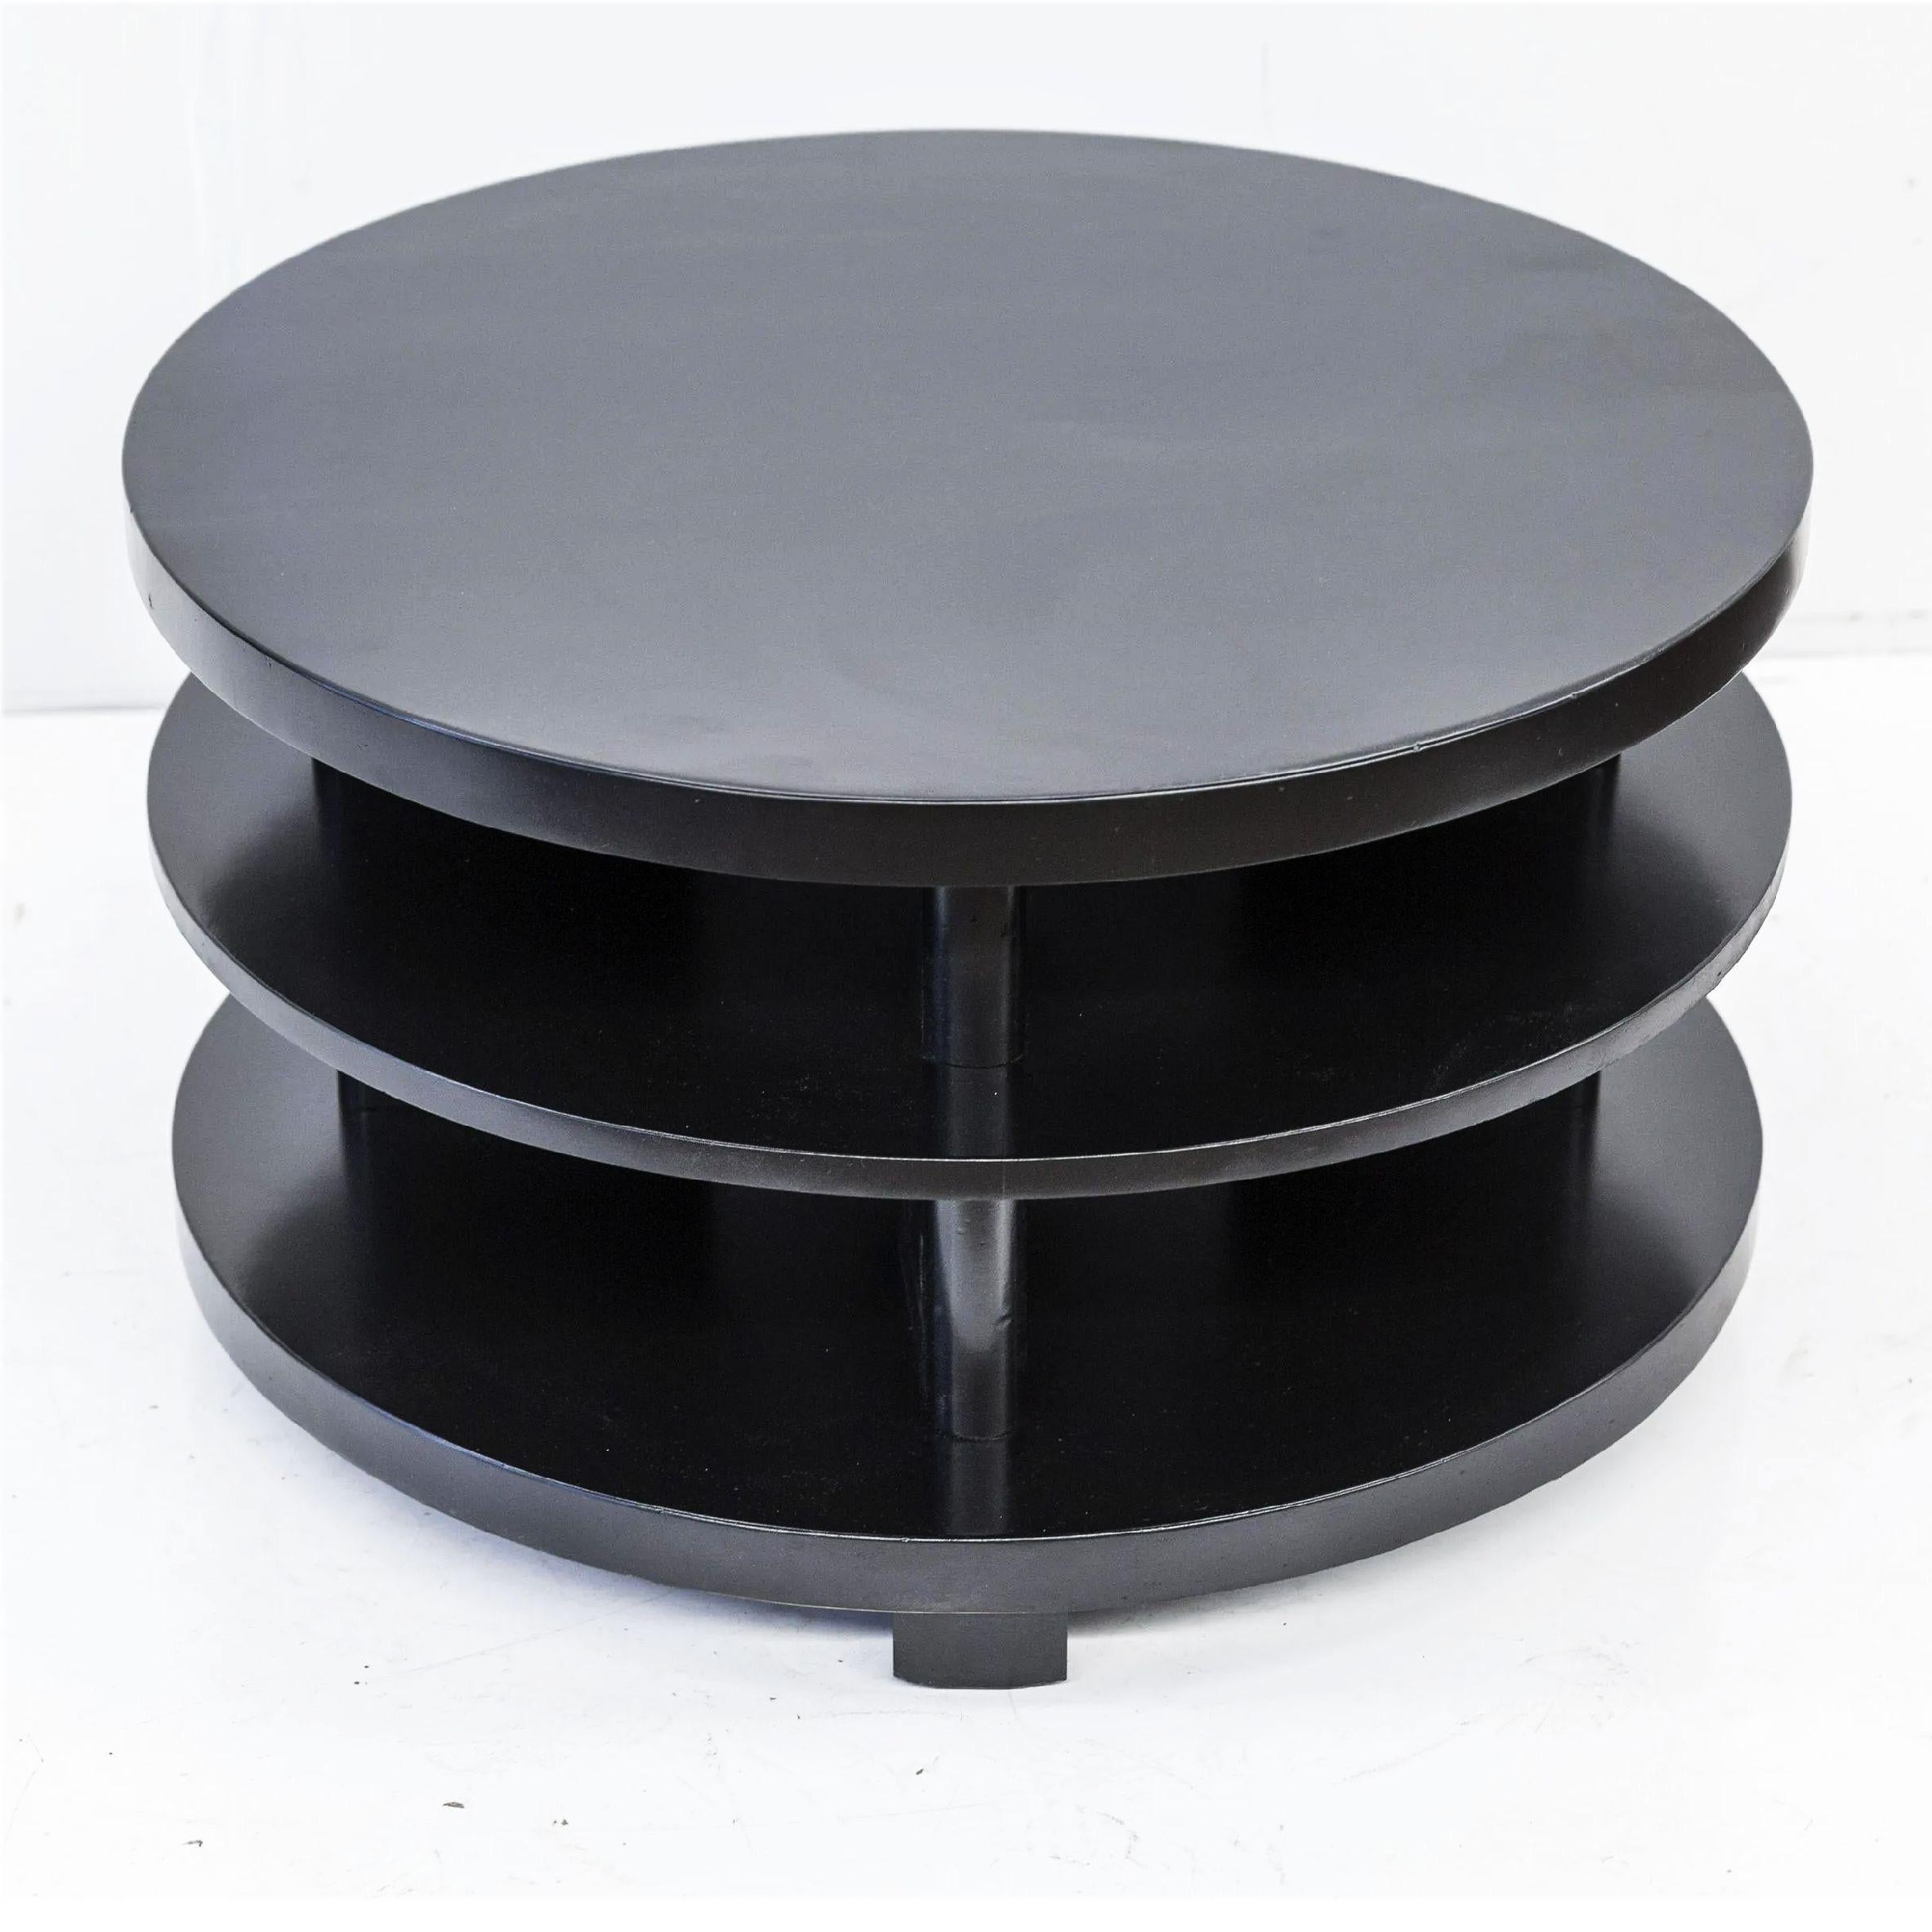 Ebonized mahogany tri-level coffee table, attributed to Paul Laszlo, Brown Saltman Los Angeles, c. 1952.

A pioneering force in the evolution of California Modern, Paul László imbued the more rigid European modernism with plusher comfort and more